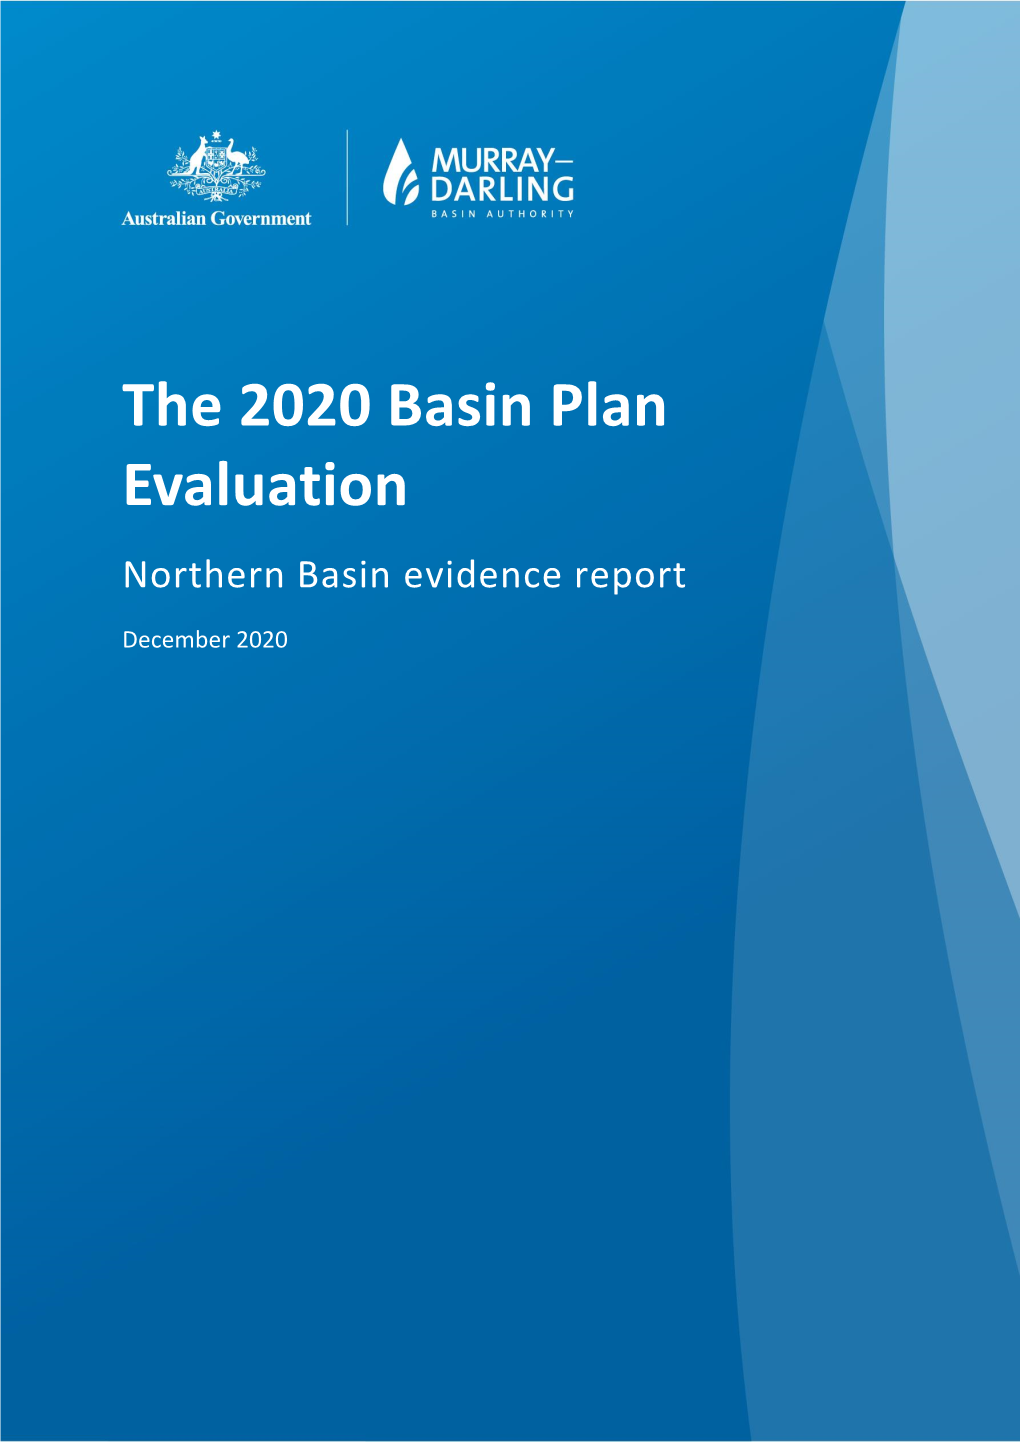 The 2020 Basin Plan Evaluation – Northern Basin Evidence Report